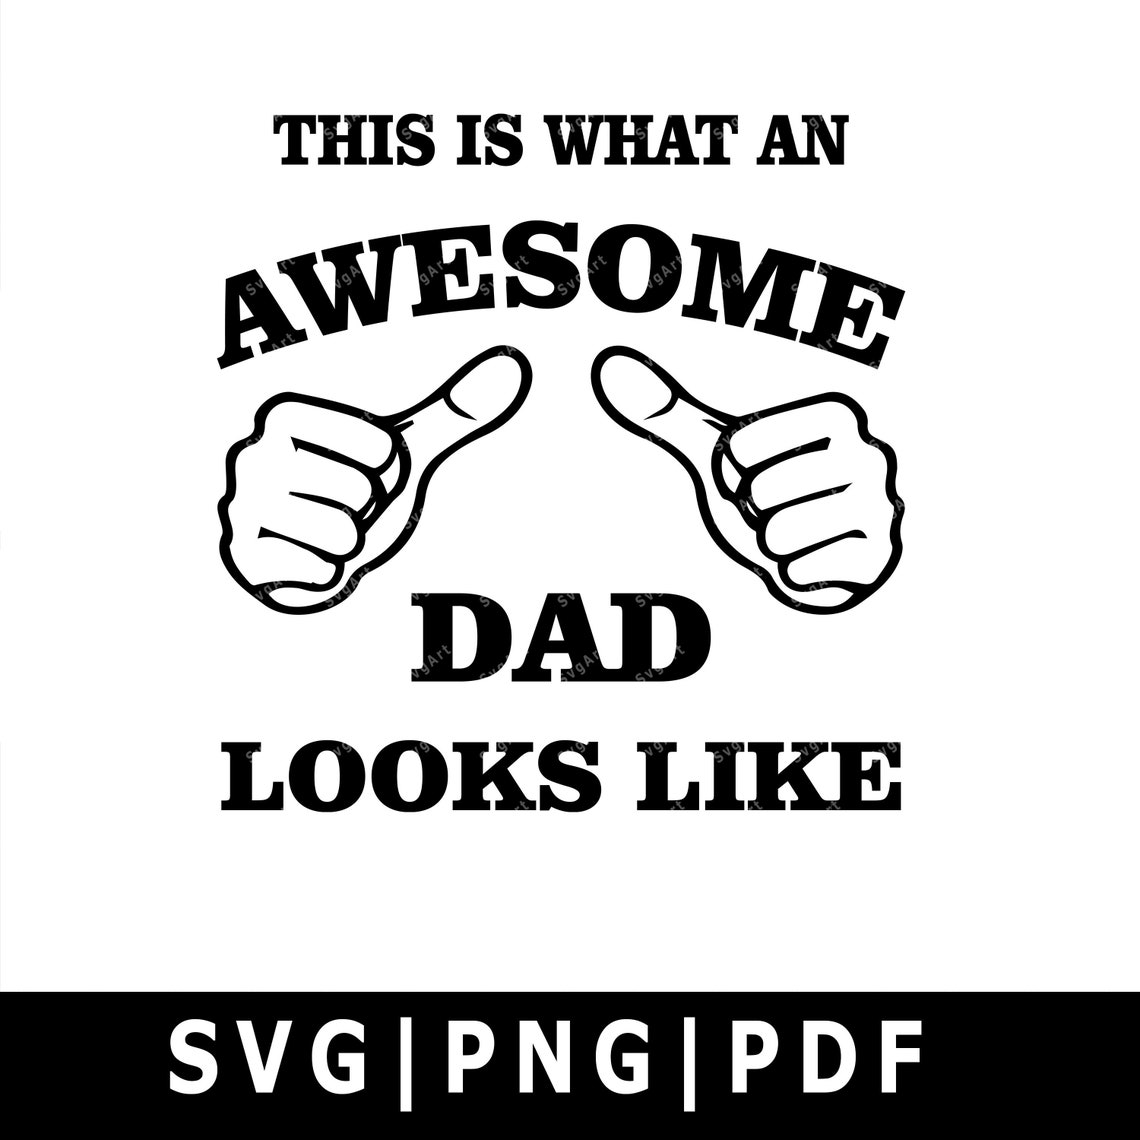 Download Awesome Dad SVG PNG PDF Cricut Silhouette Cricut svg | Etsy